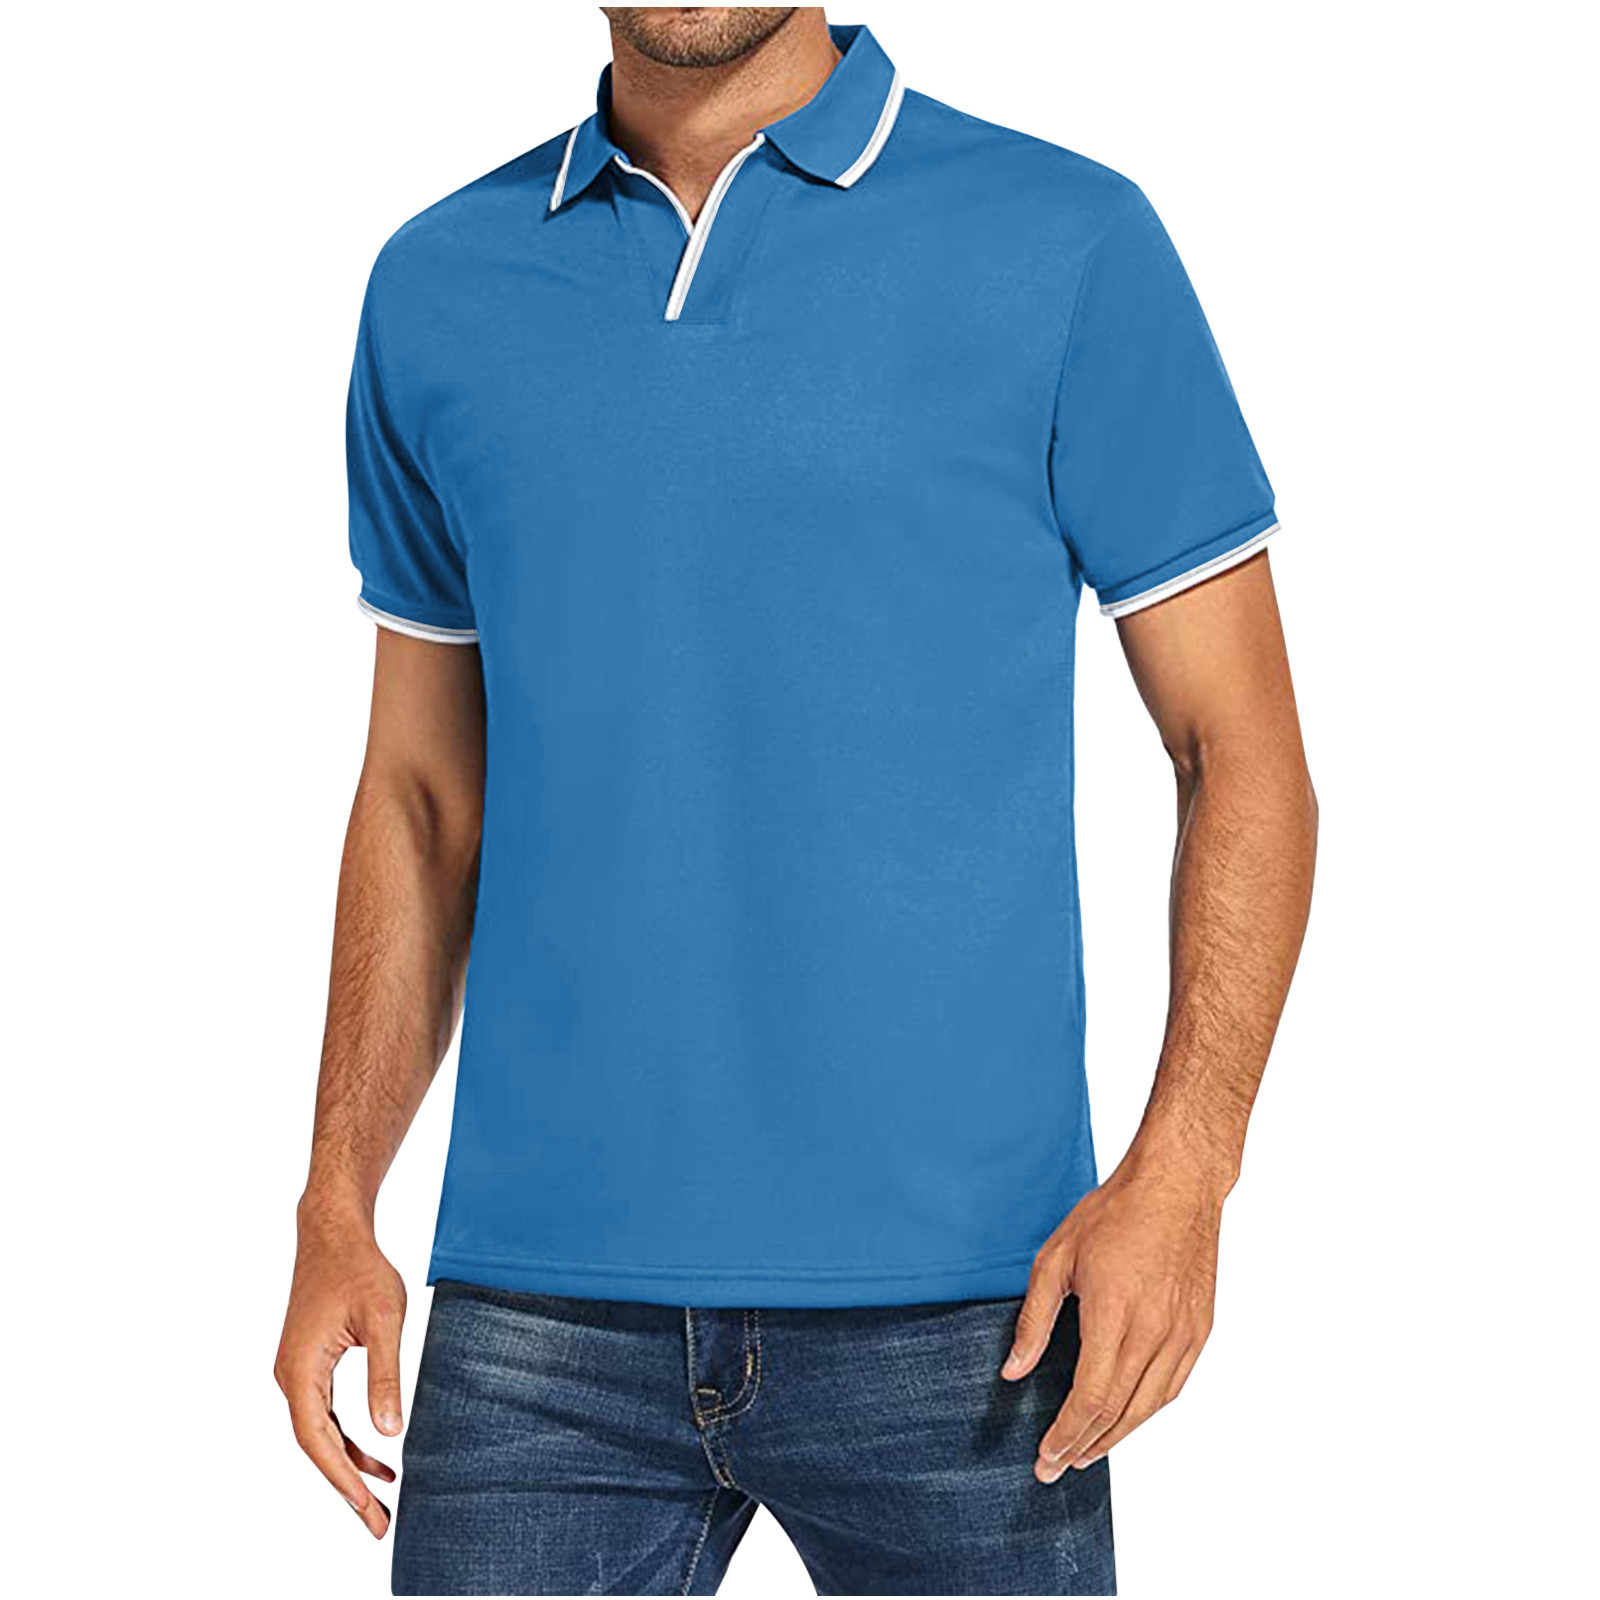 Polo Shirts for Men Casual Short Sleeve Golf Polos Classic Fit Athletic  Tshirt Neck Dress Shirt Tennis Tops